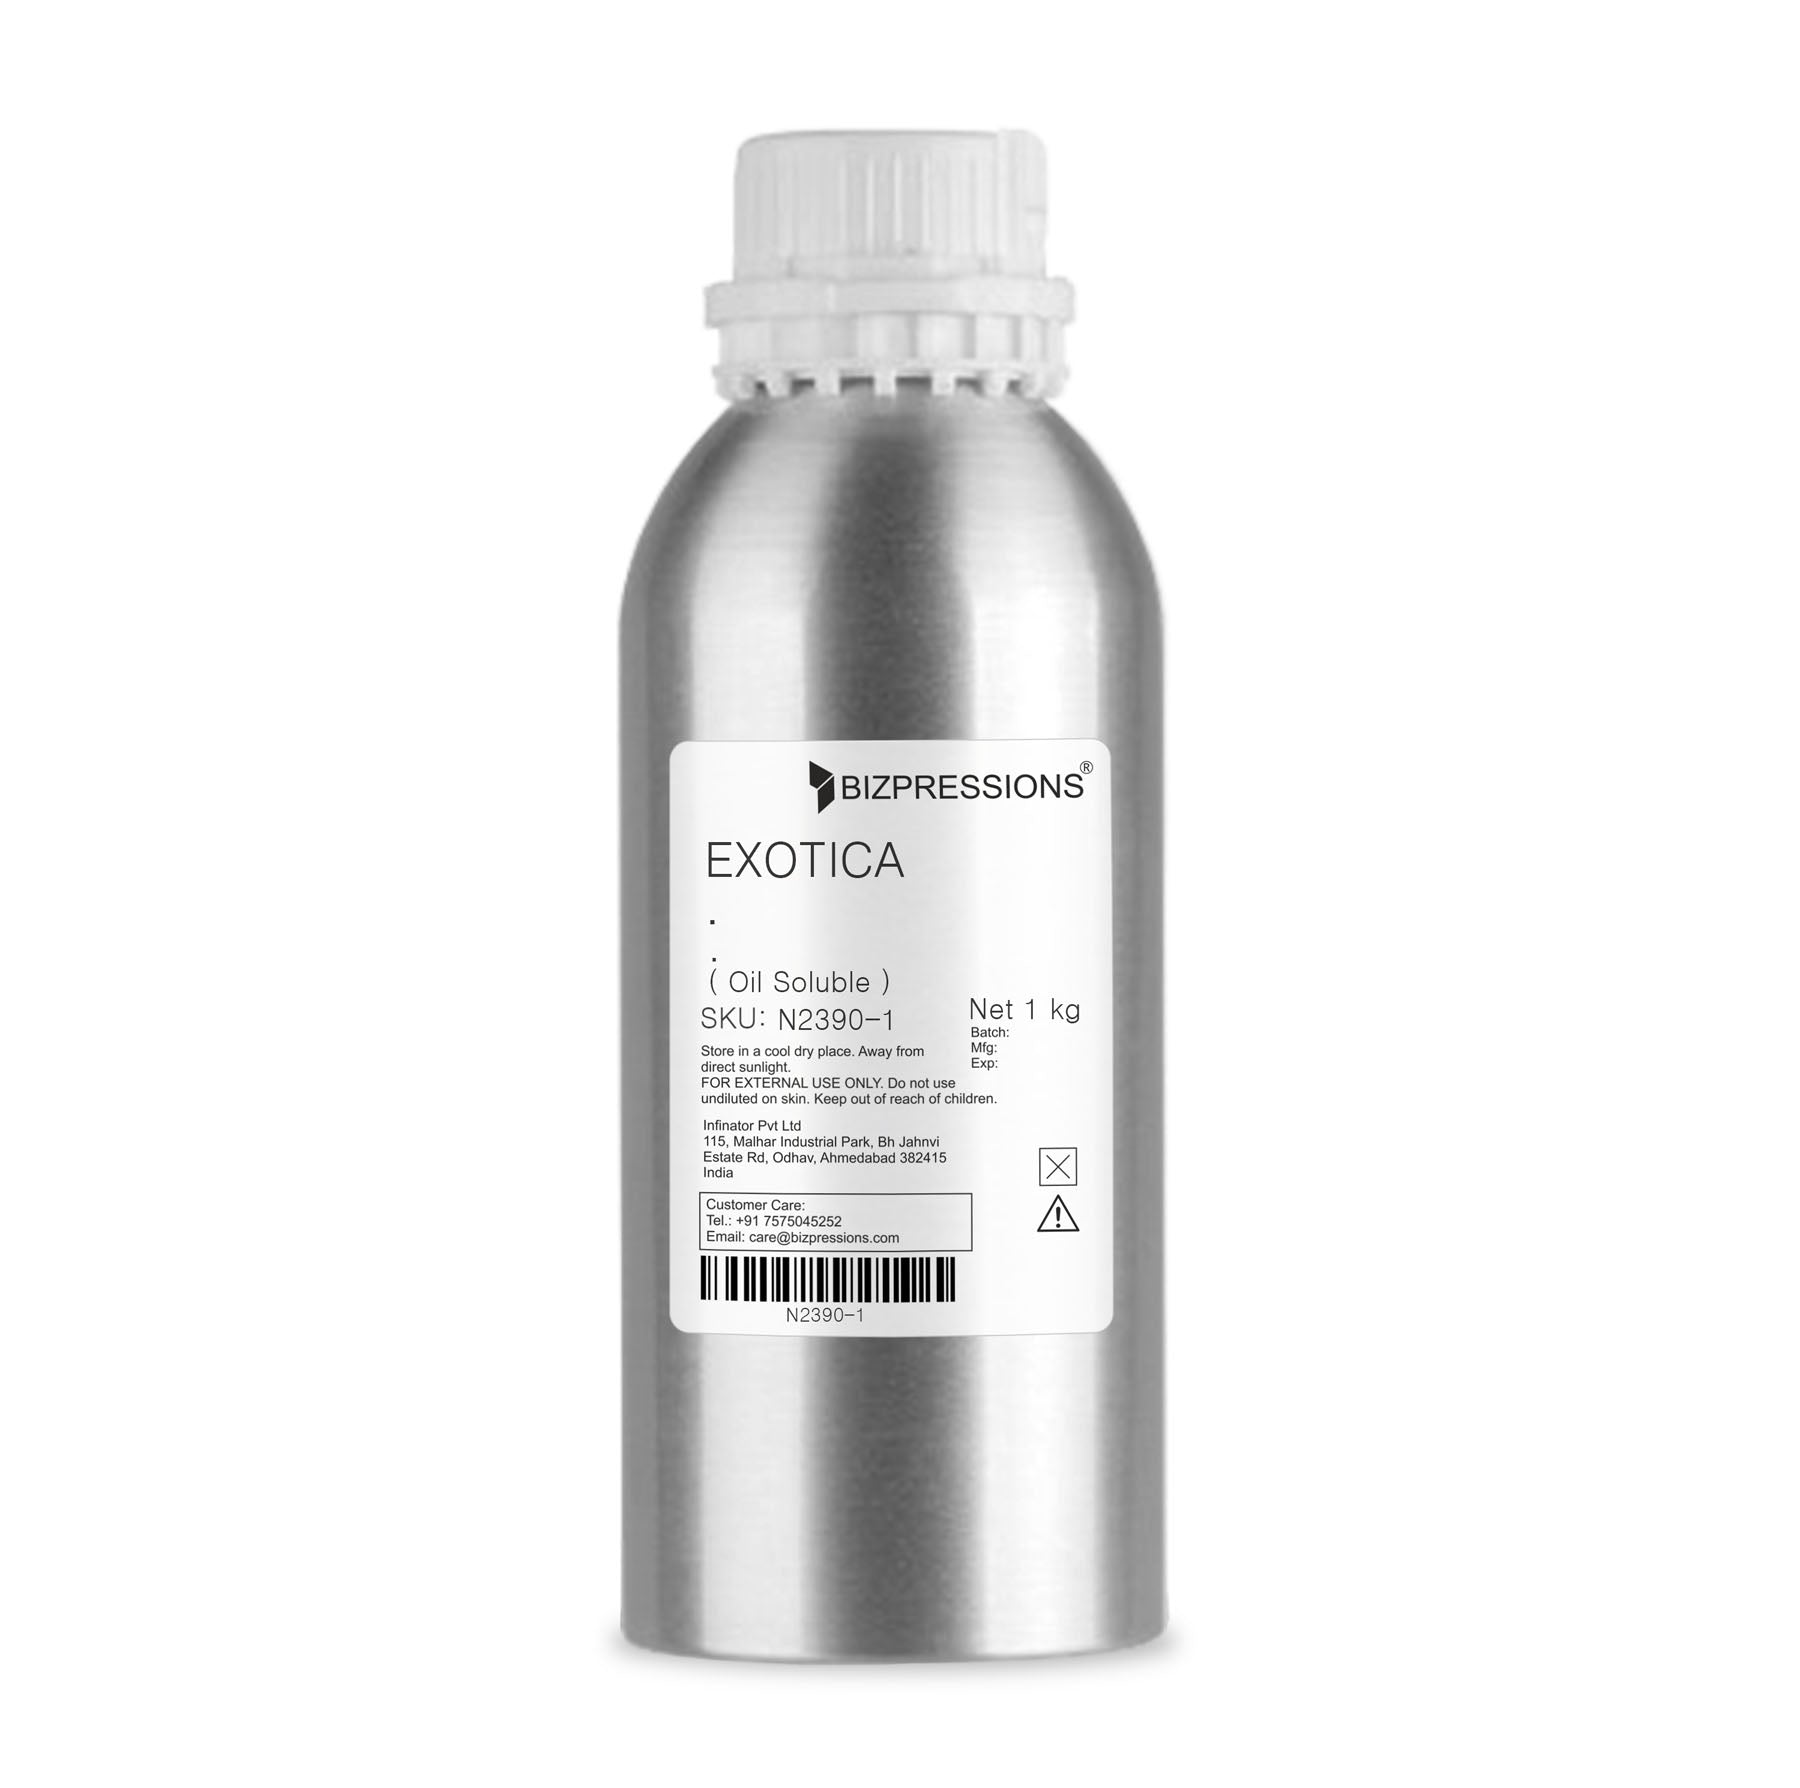 EXOTICA - Fragrance ( Oil Soluble )